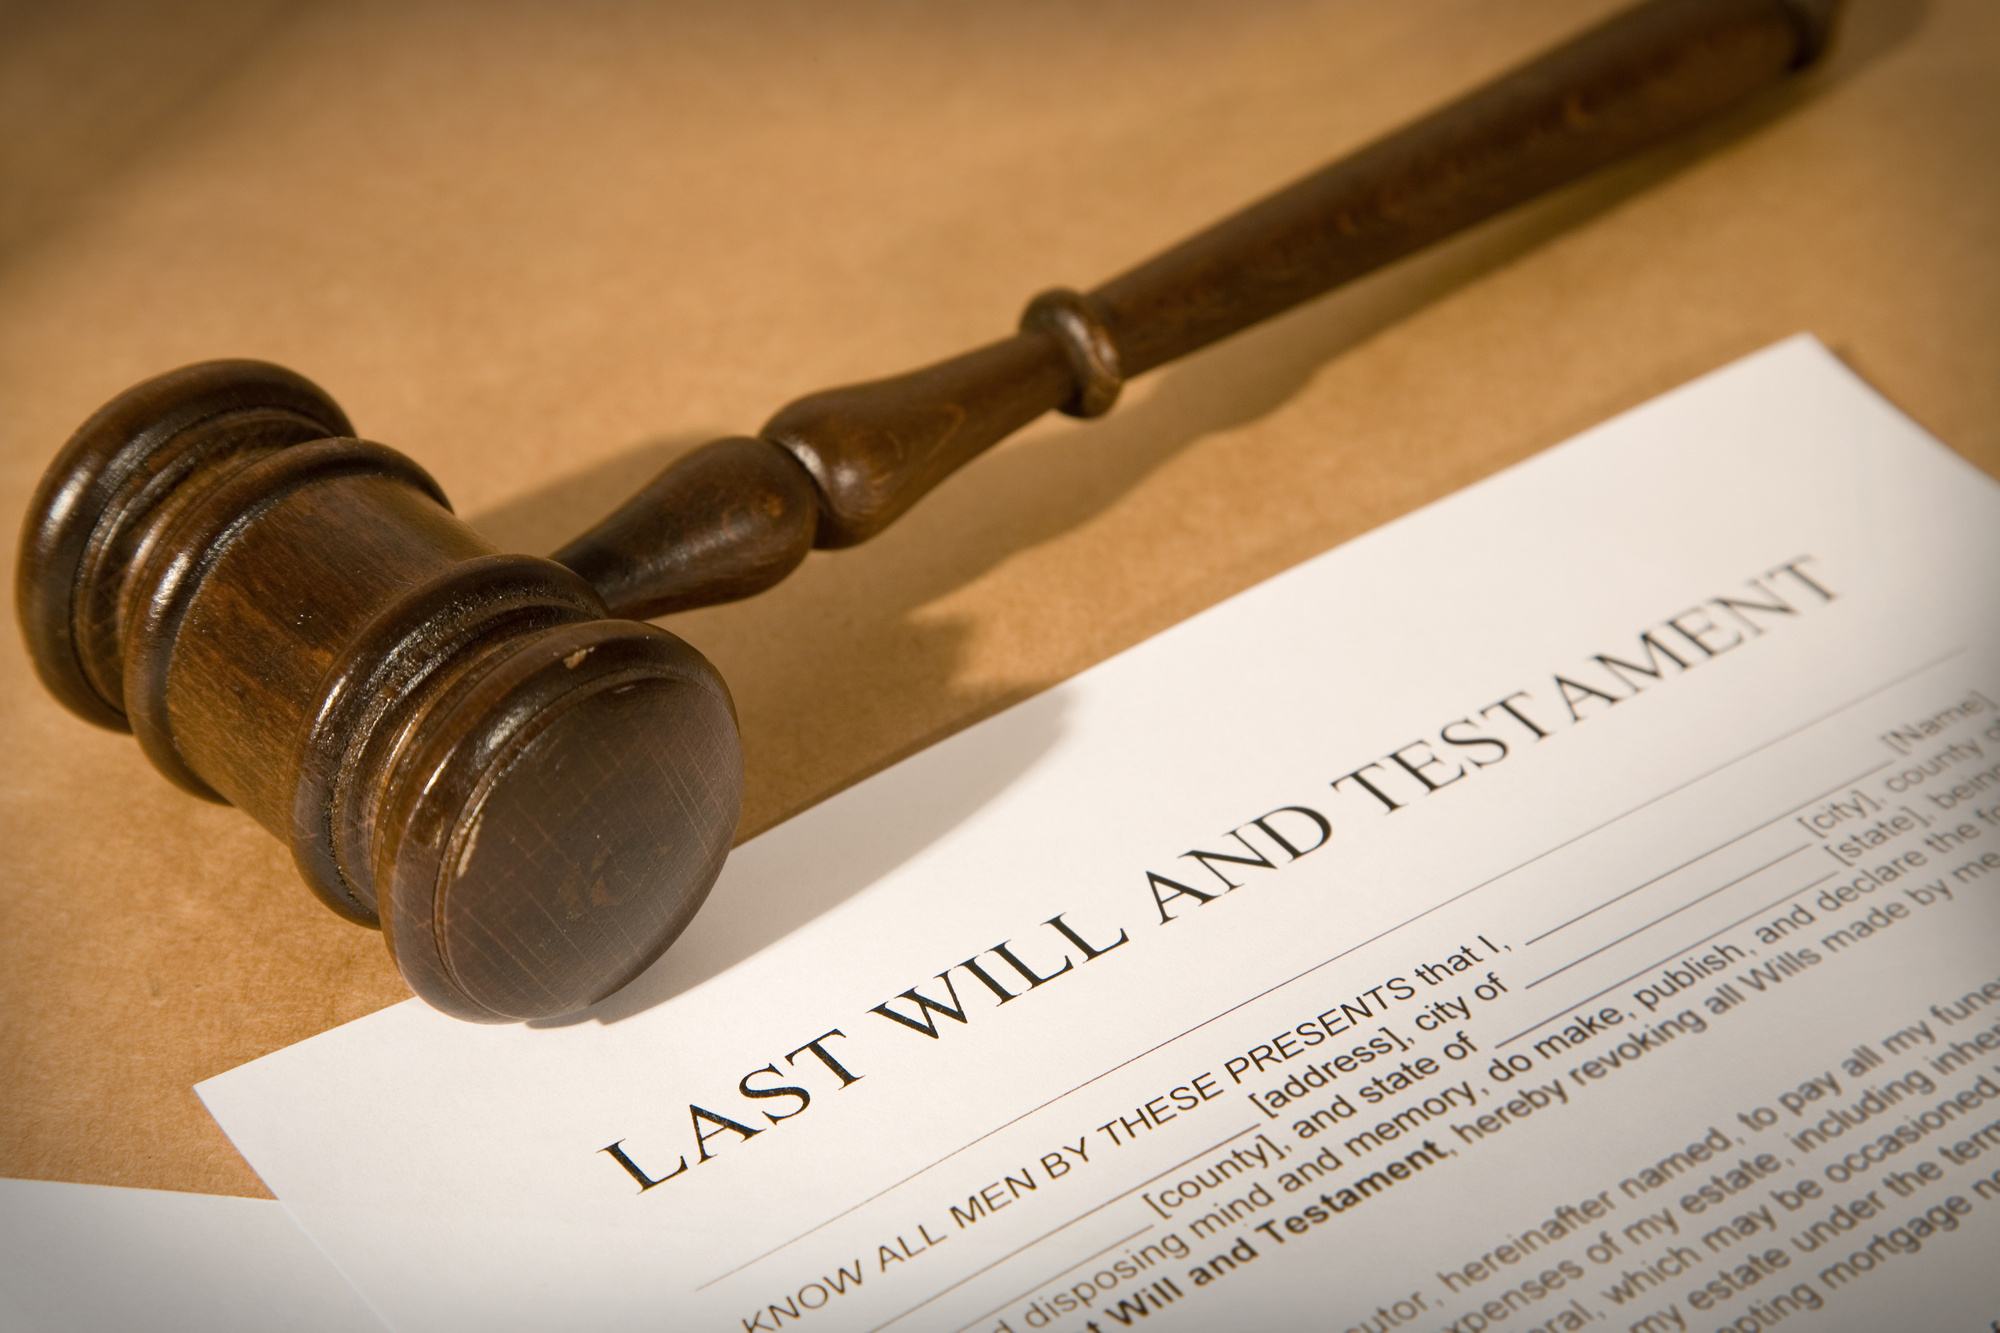 last-will-and-testament-form-with-gavel-estate-planning-real-estate